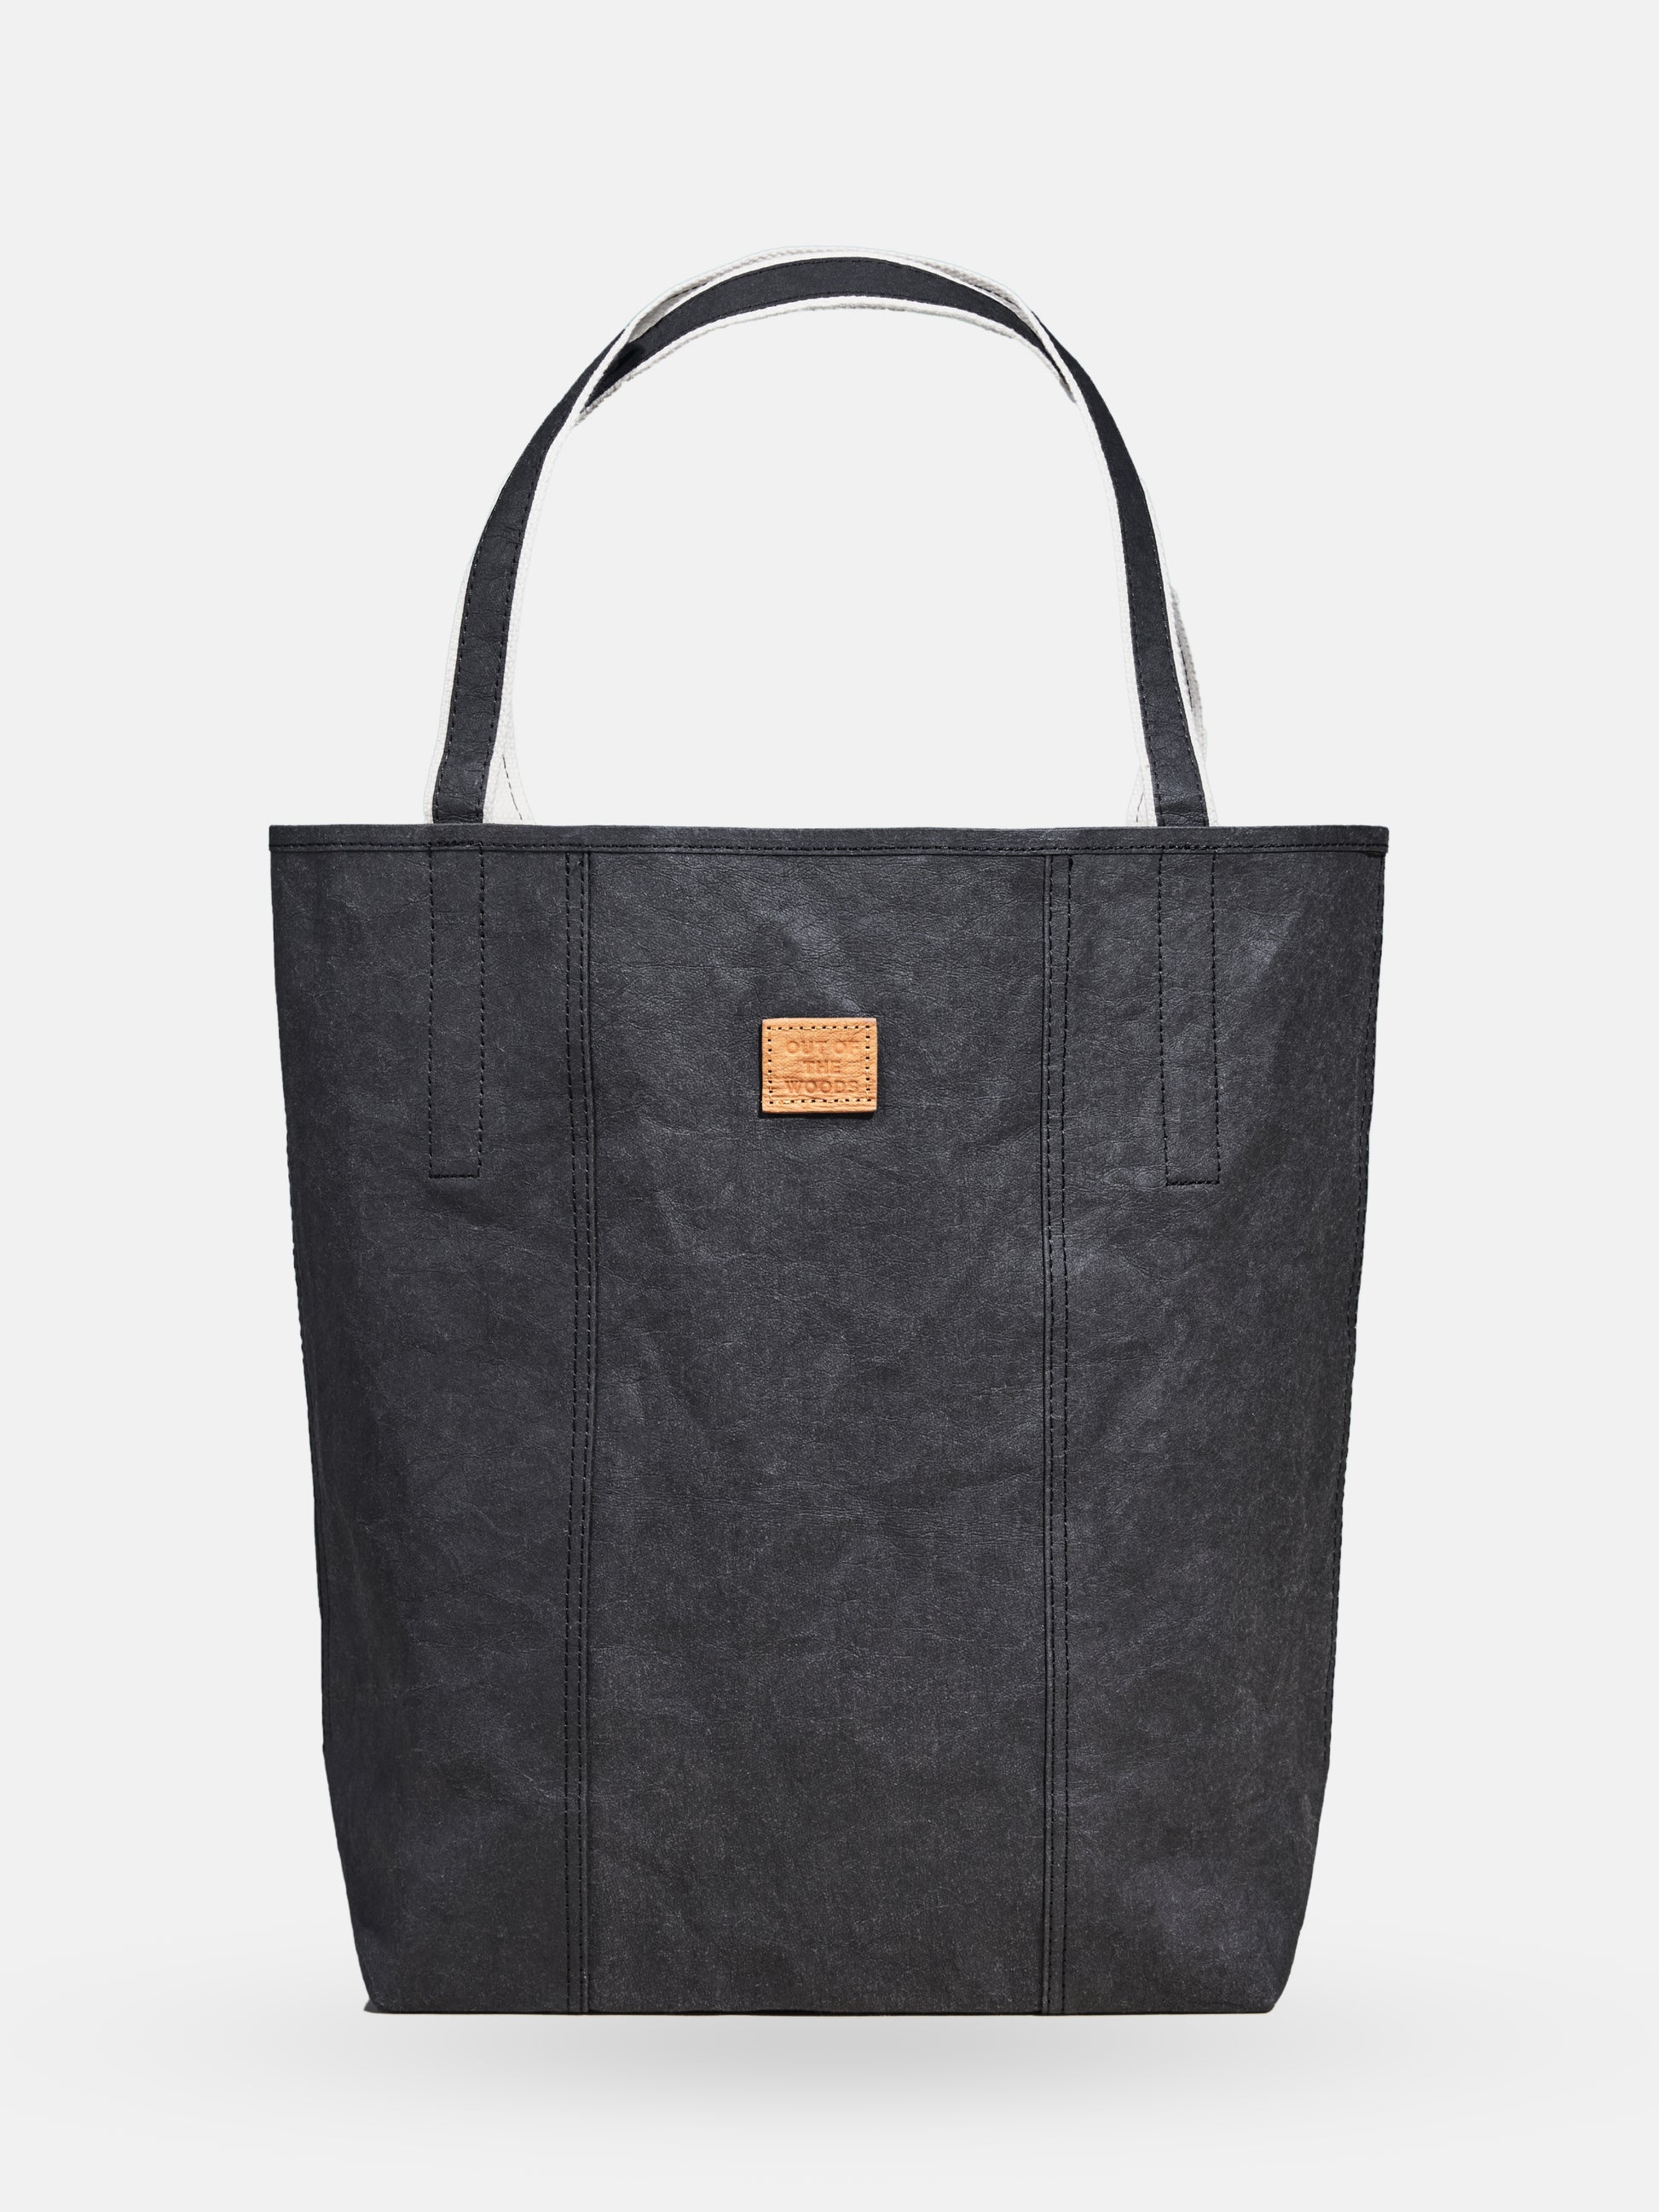 Vegan Grocery Bag Shopper | Sustainable Washable Reusable Tote | Out of ...